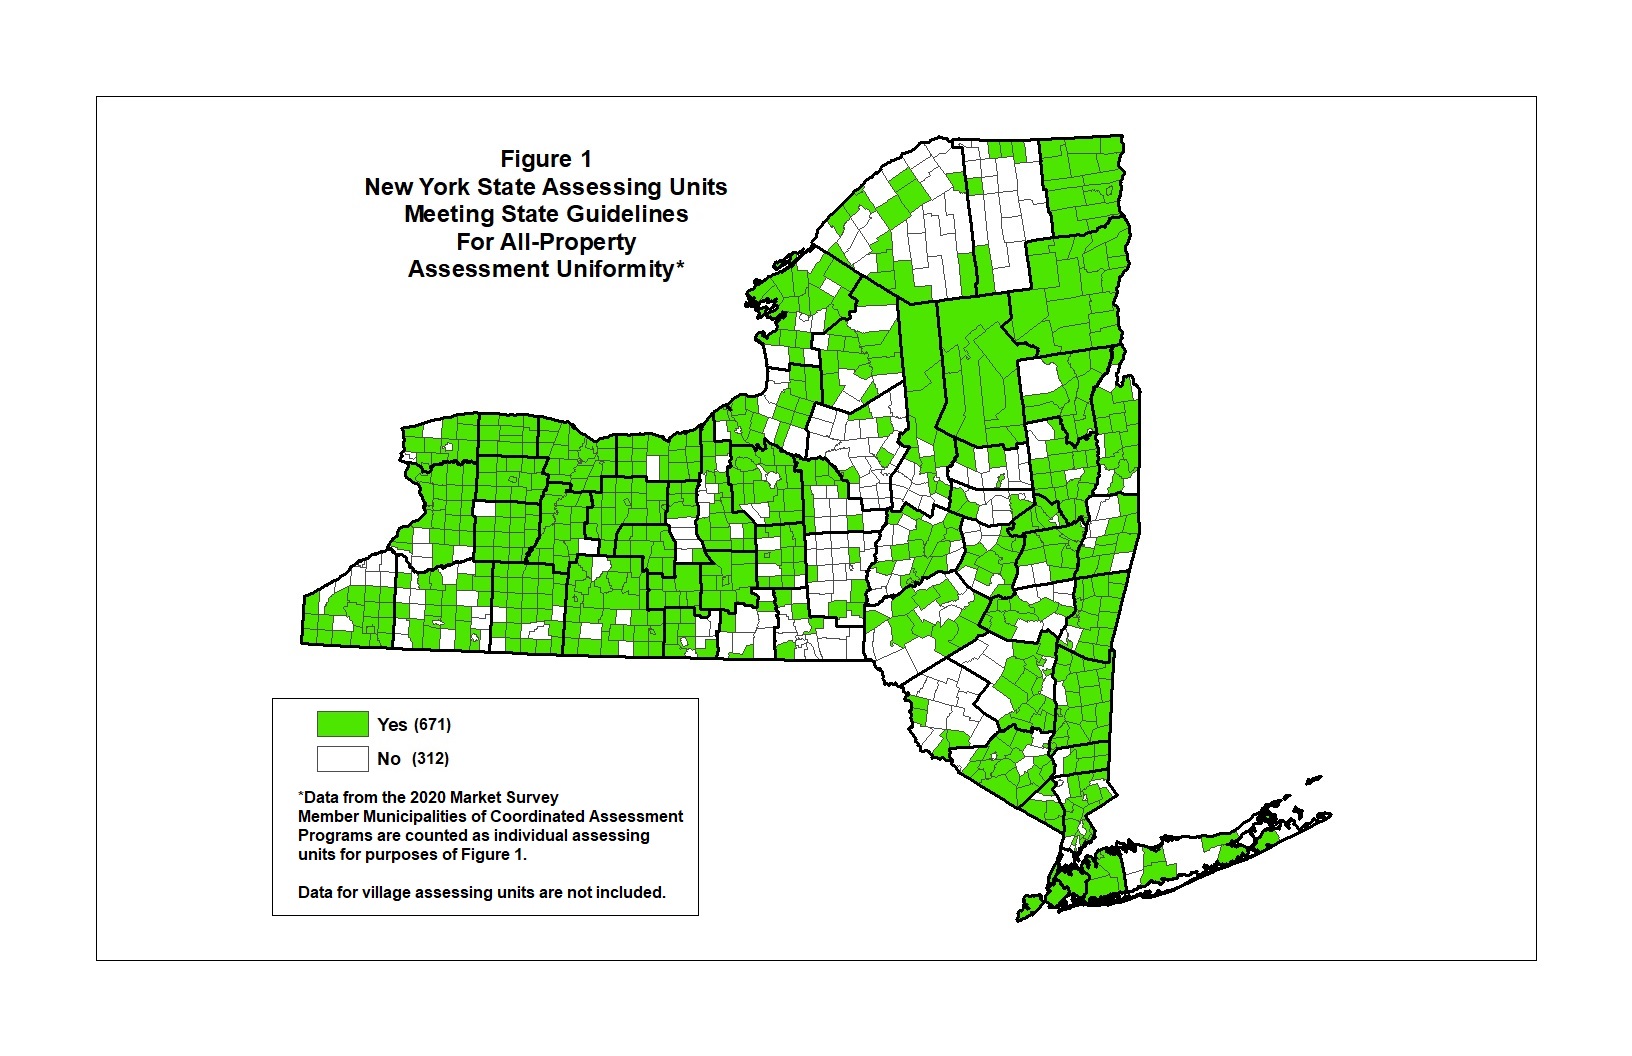 Image that states Figure 1 New York State Assessing Units Meeting State Guidelines for All Property Assessment Uniformity written on top left corner. The map consists of 671 assessing units highlighted in green for Yes, and 312 assessing units left not filled in for No. Under the key on the bottom left corner of image, there is text that reads 